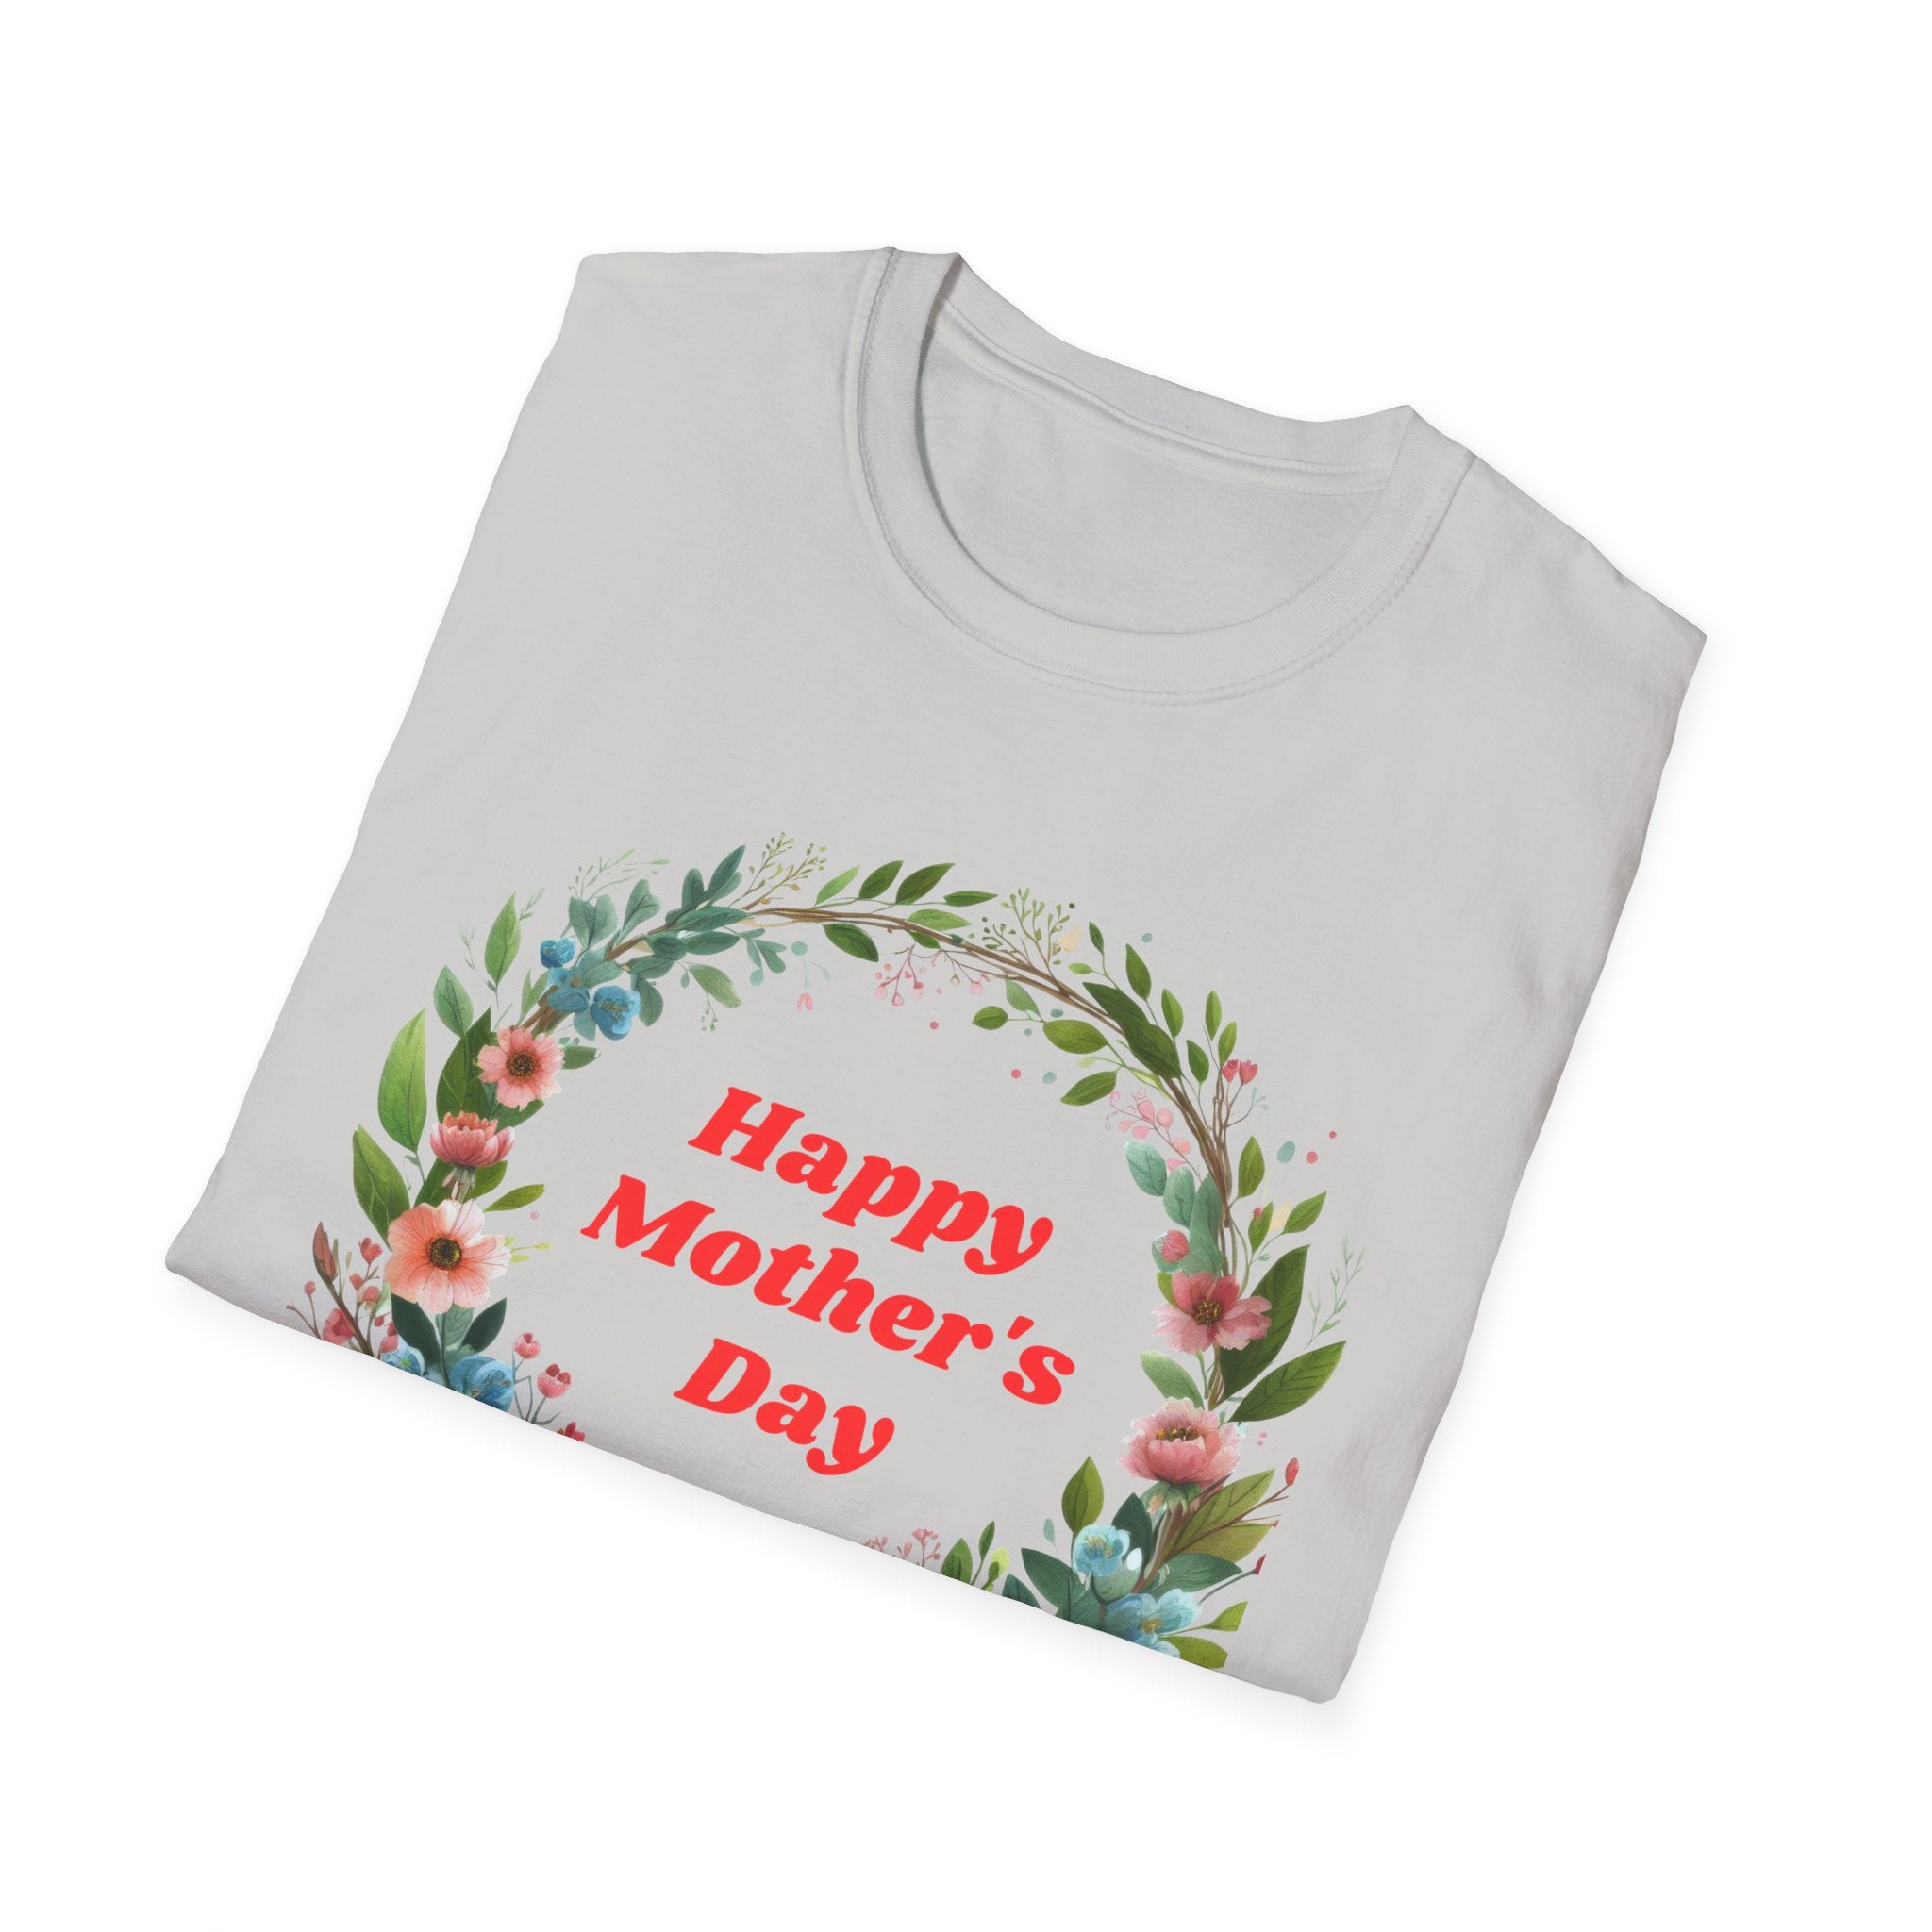 Happy Mother's Day Unisex Softstyle T-Shirt, Gift for Mom, Mother's Day gift